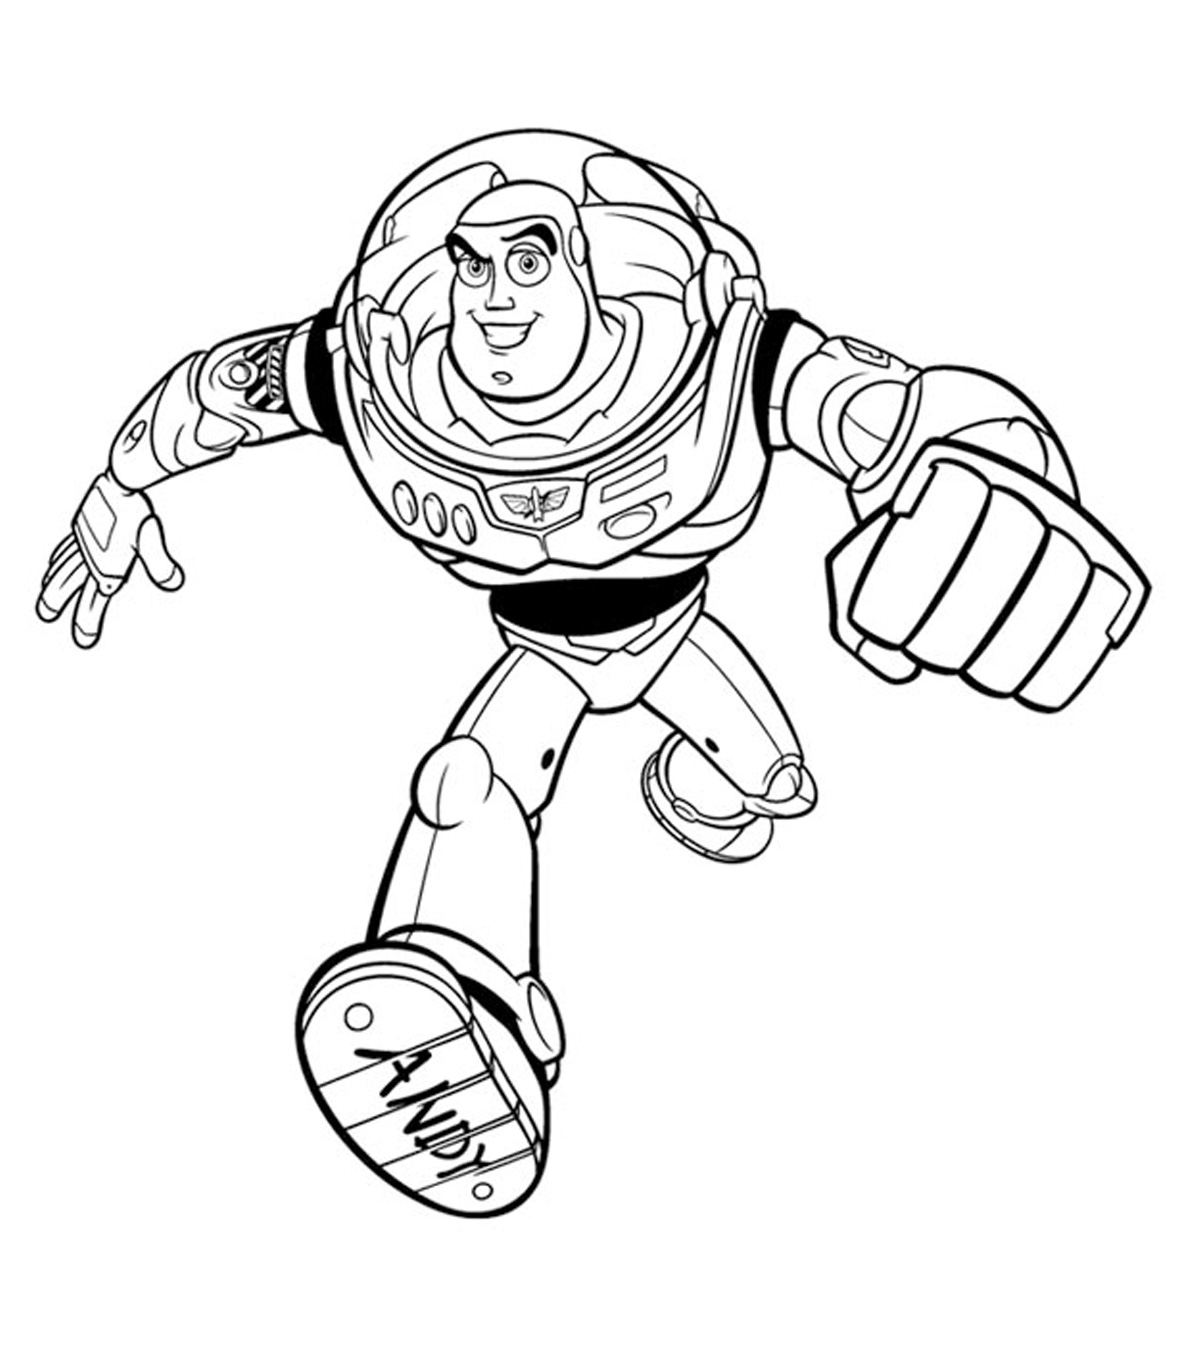 Story Coloring Pages Top 20 Free Printable Toy Story Coloring Pages Online